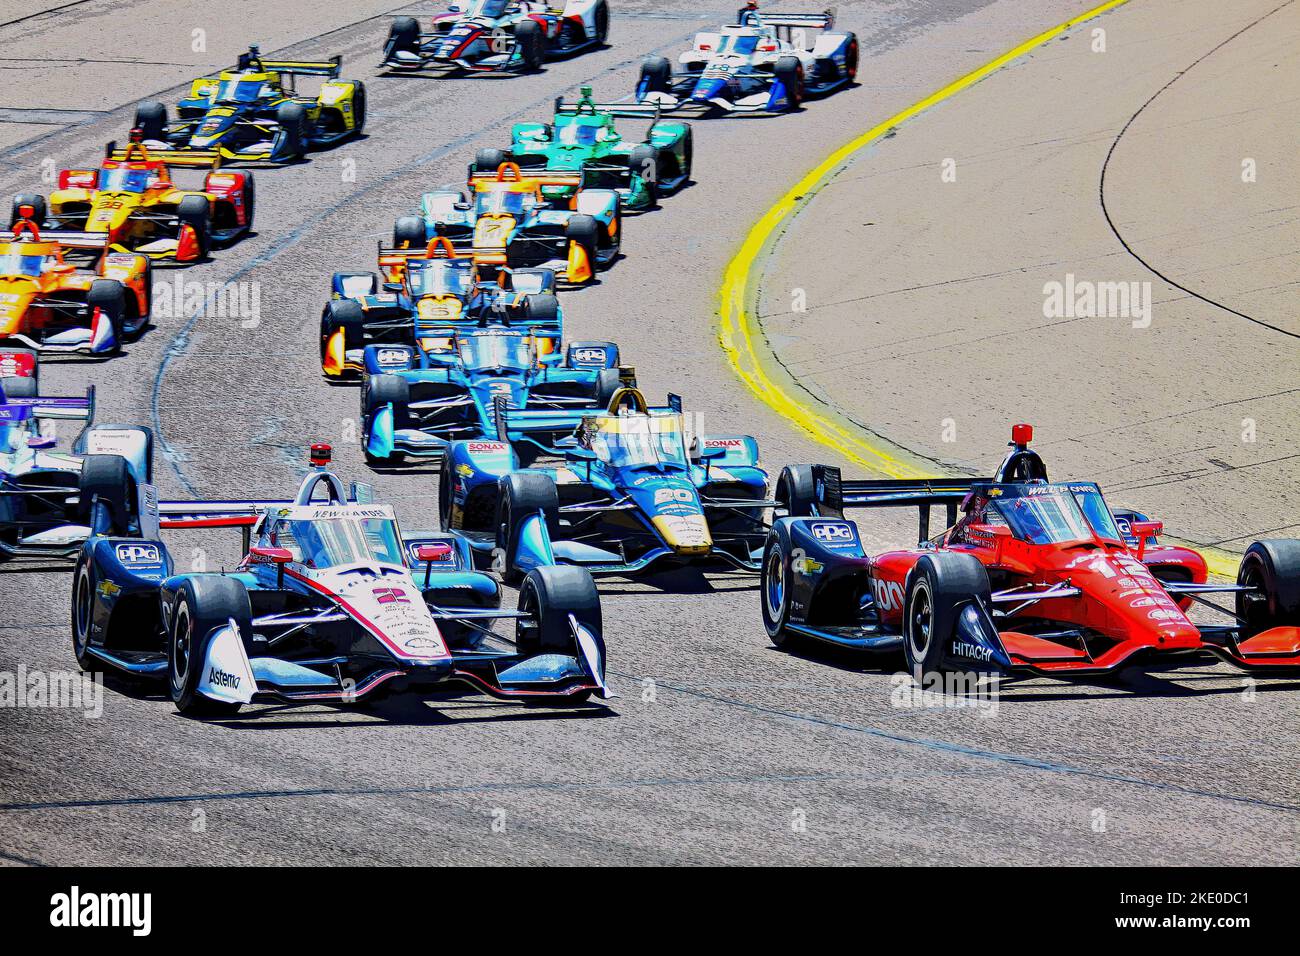 Newton, IA USA - 24 July 2022: Race Start, Will Power #12, leads the pack into the first corner at Iowa Speedway. Josef Newgarden #2 on left. FILTERED Stock Photo